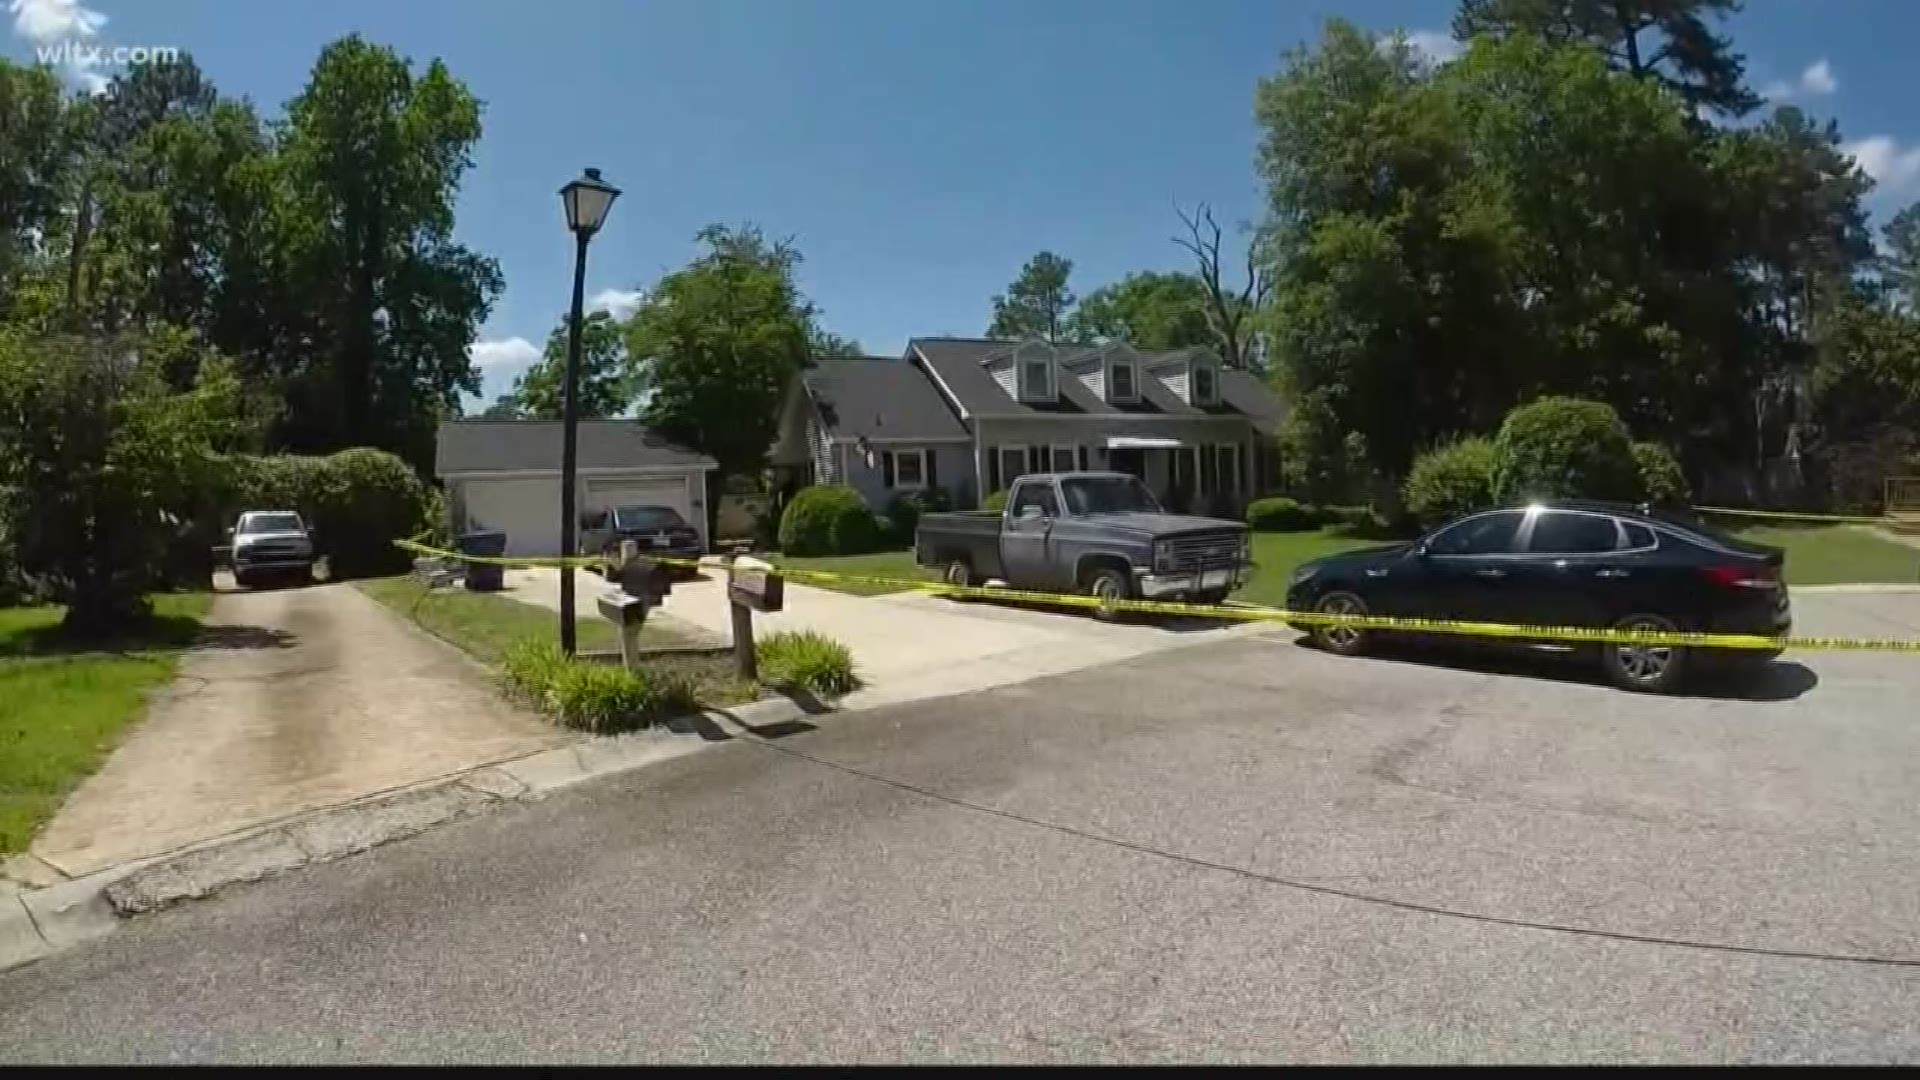 Deputies are searching for a suspect who shot and killed an 8-year-old in a home invasion in Lexington.